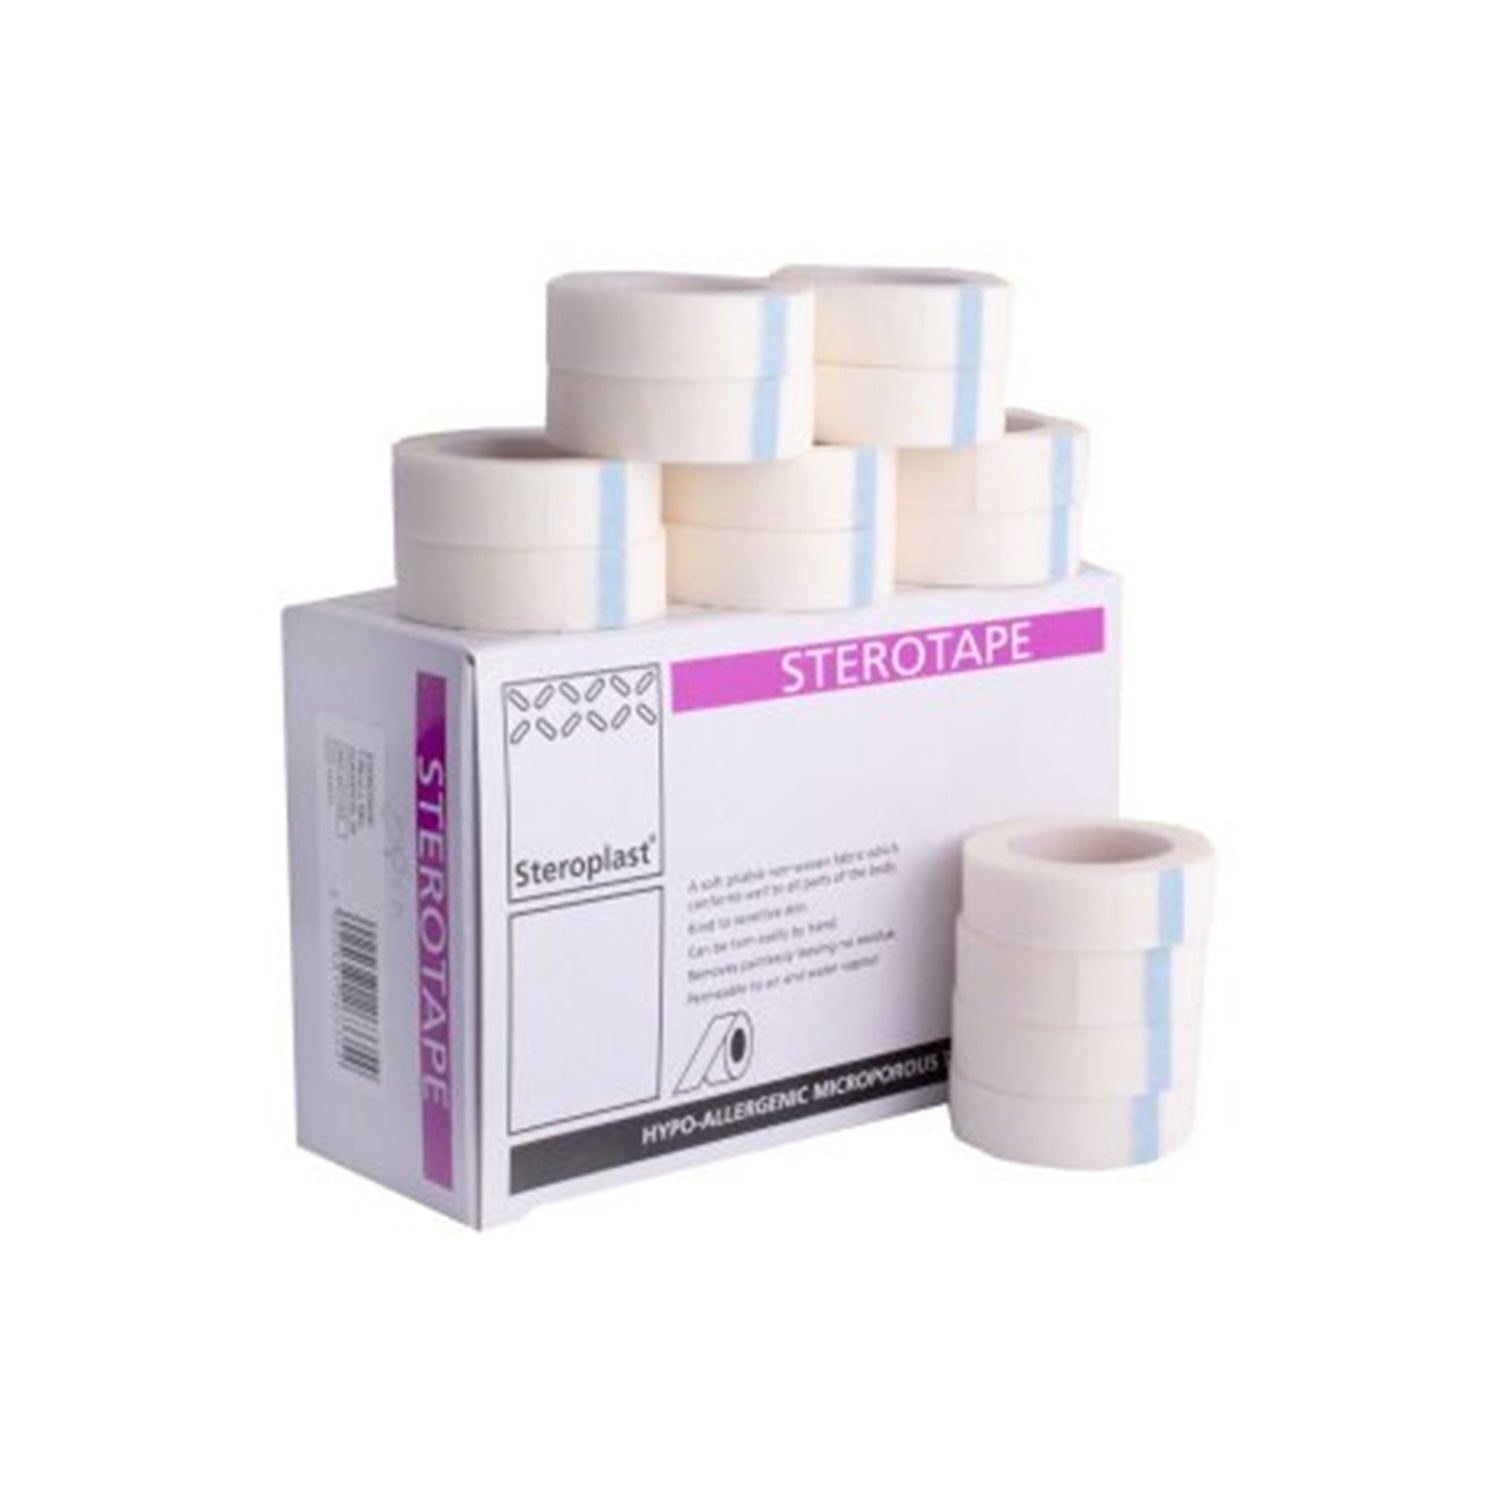 Sterotape Hypoallergenic Surgical Tape | 1.25cm x 10m | Pack of 24 Rolls (2)